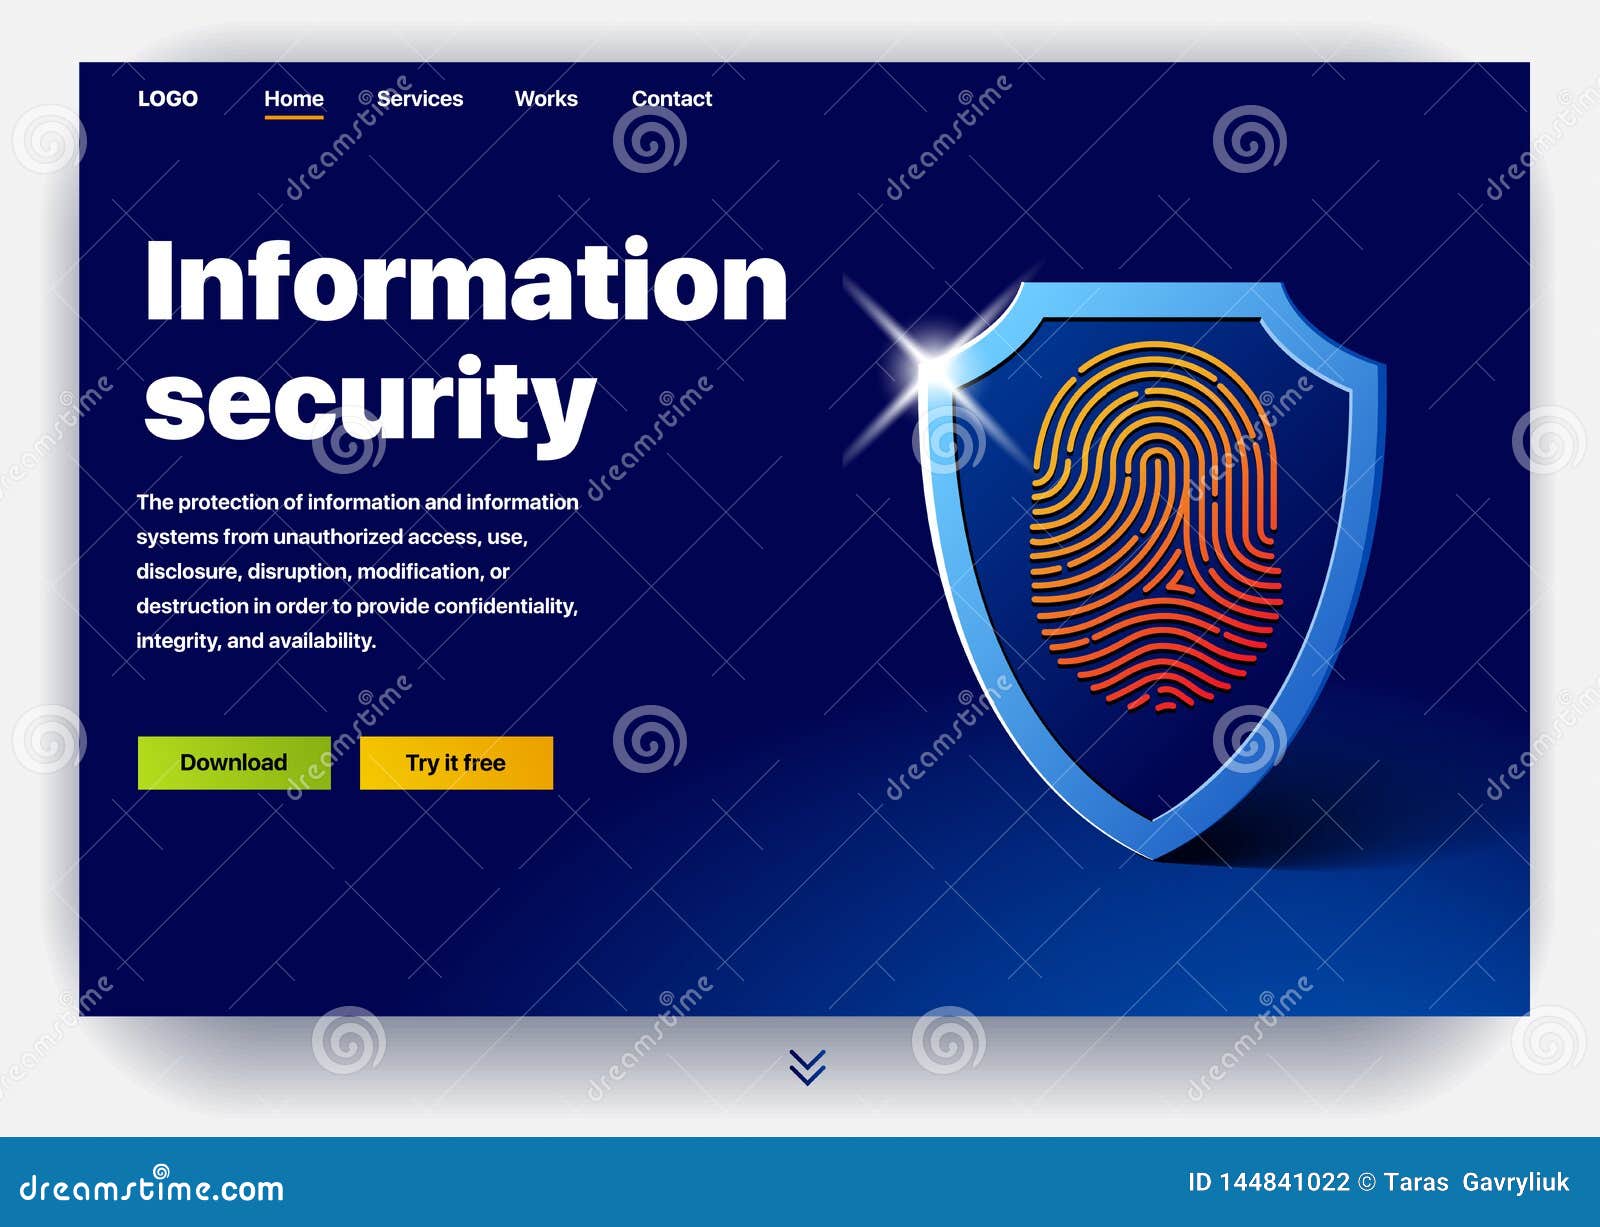 website providing the service of information security